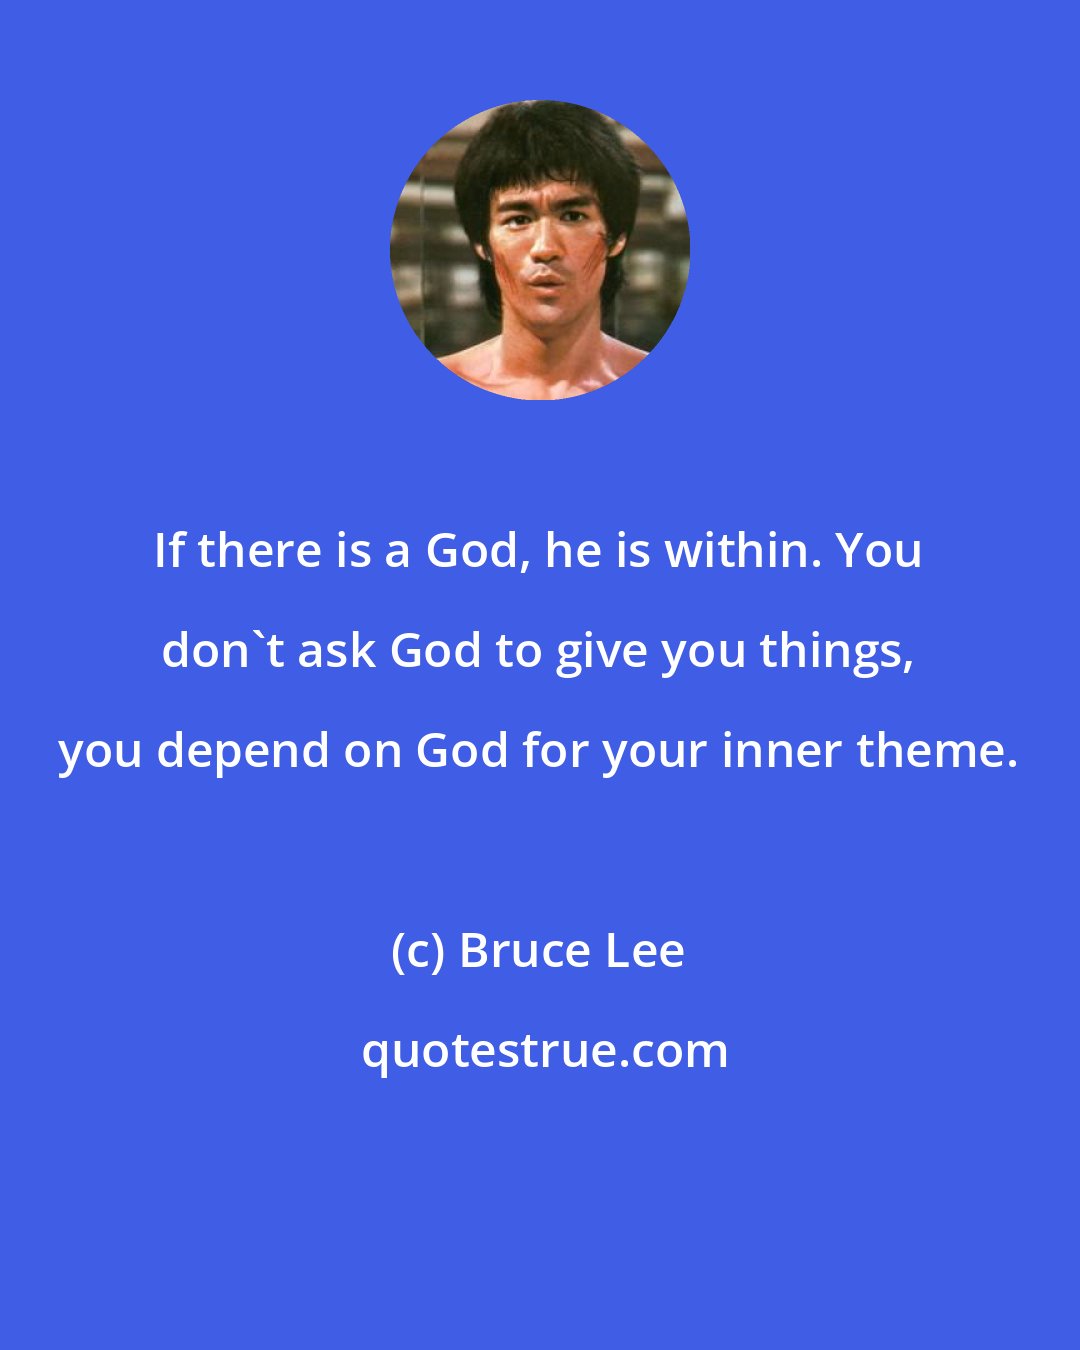 Bruce Lee: If there is a God, he is within. You don't ask God to give you things, you depend on God for your inner theme.